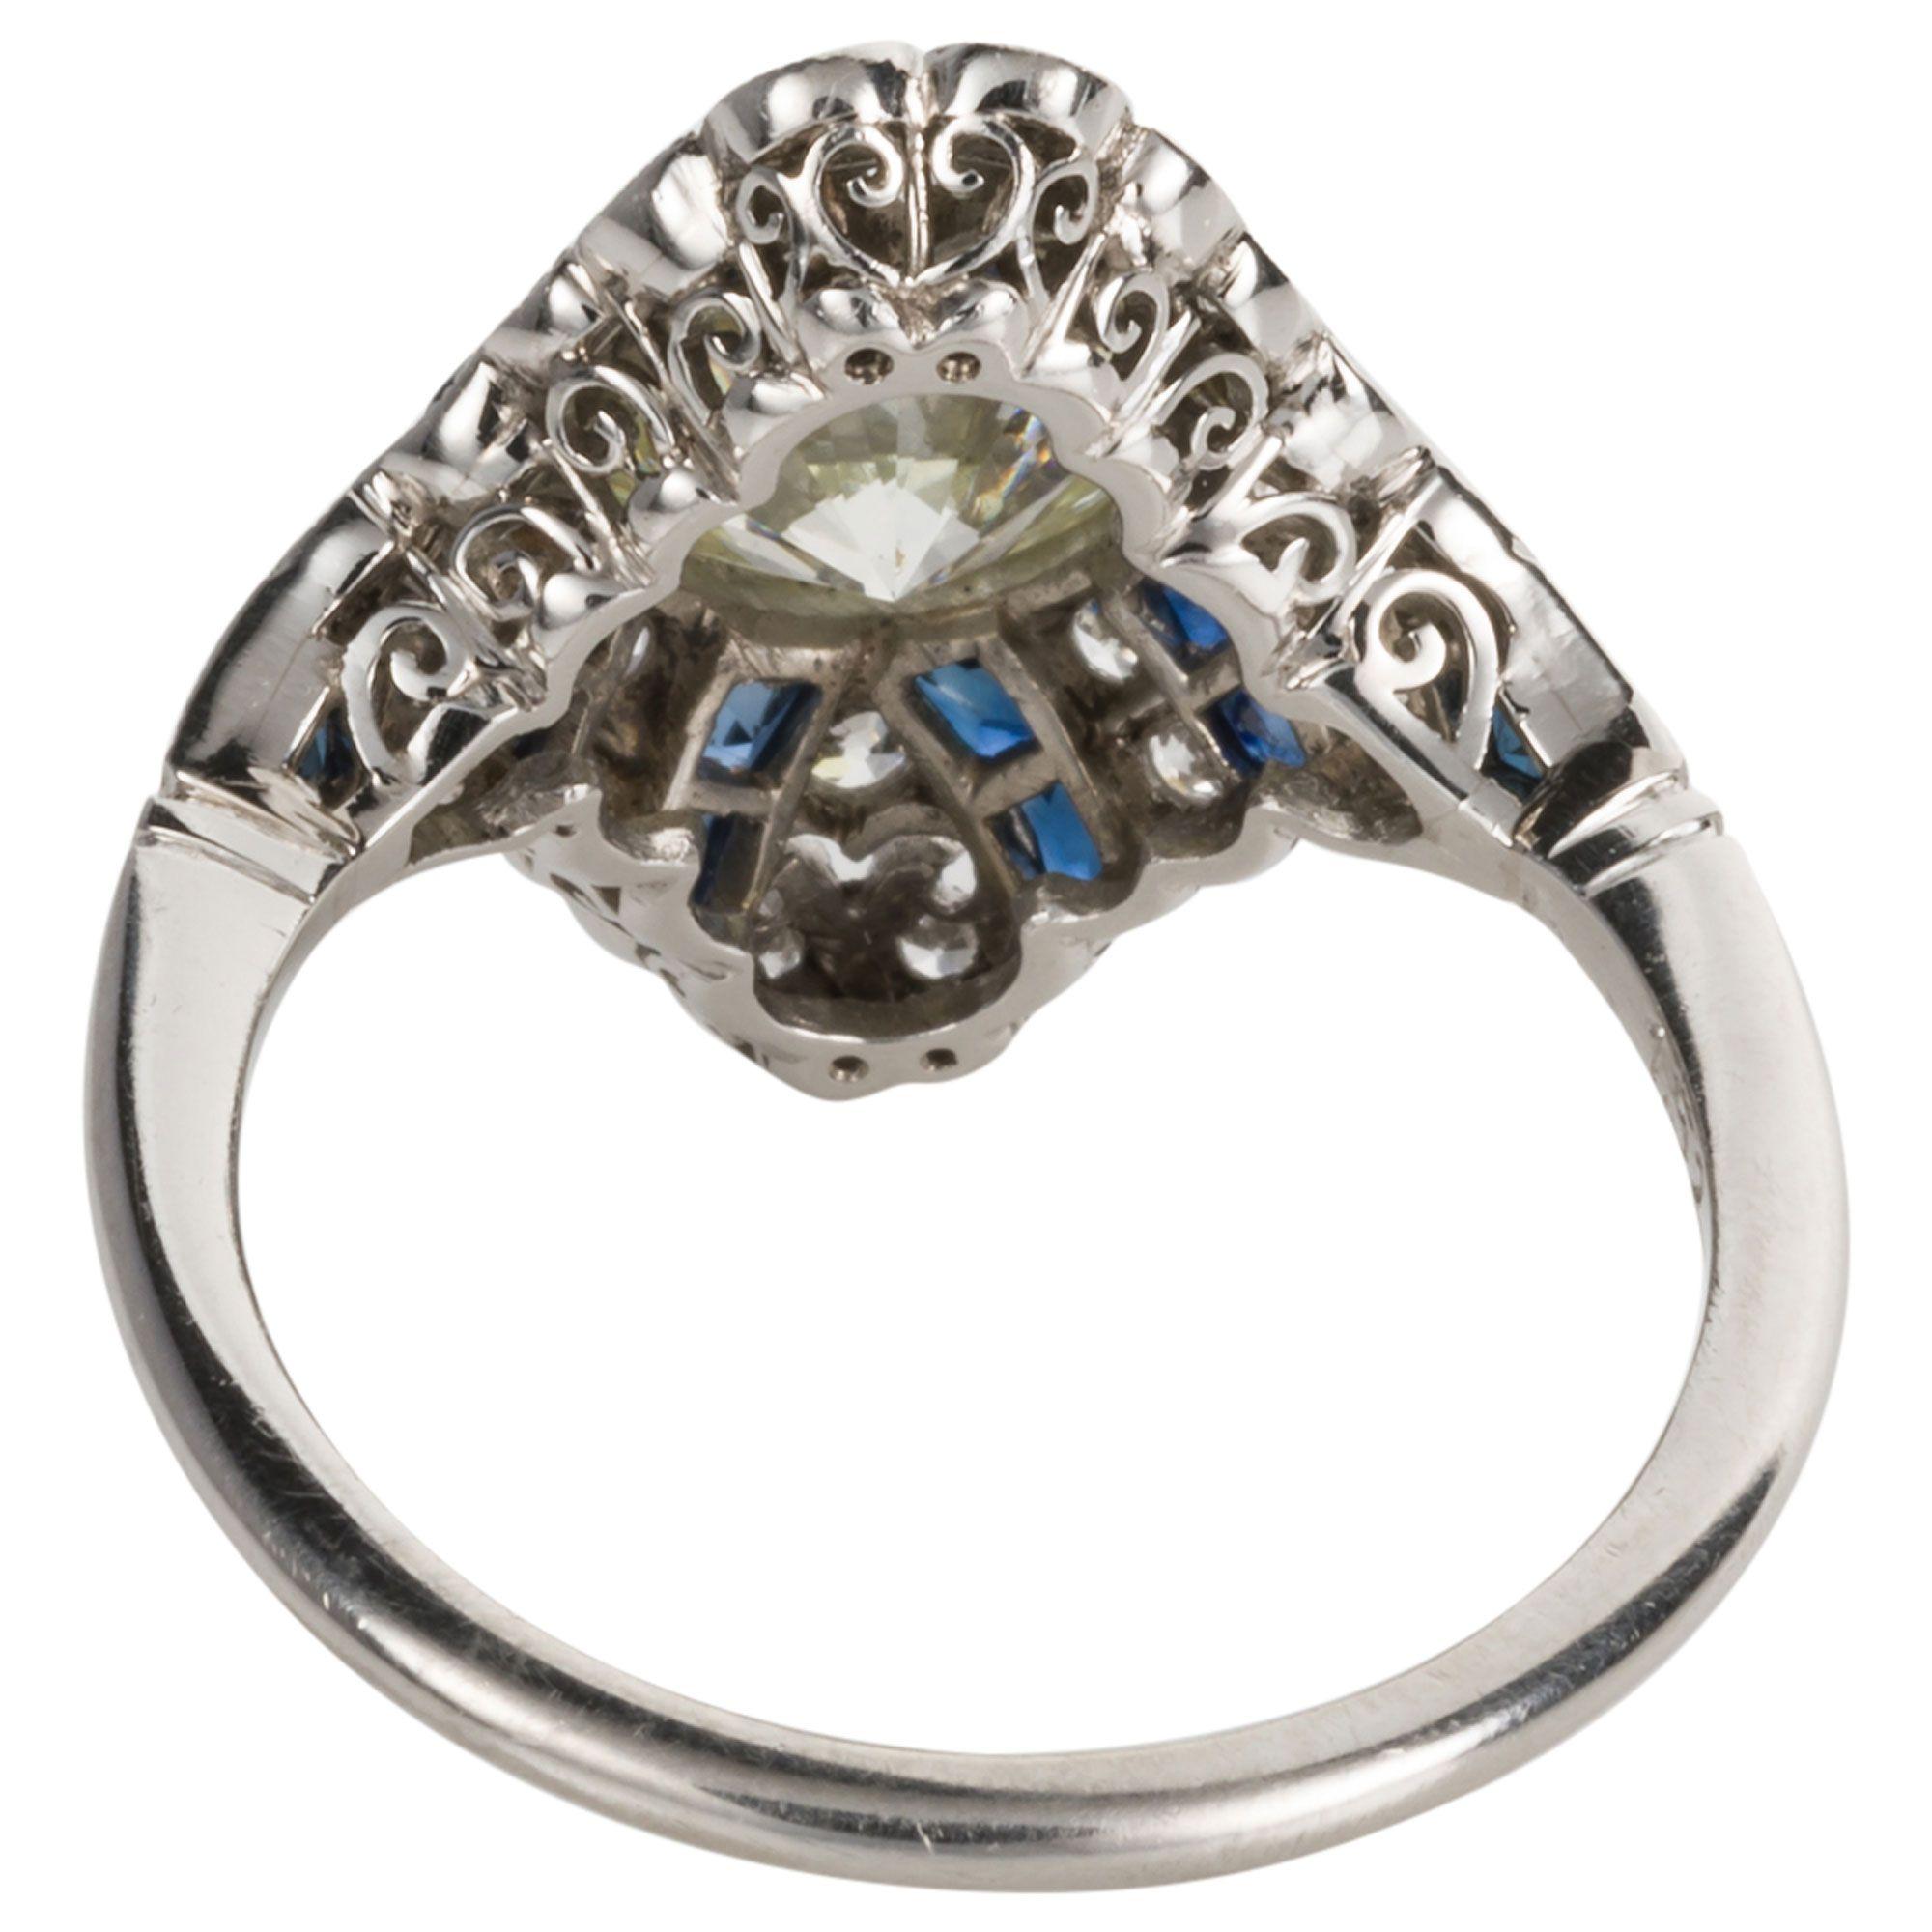 Women's 1.52 Carat Old European Cut Diamond and Sapphire Art Deco Inspired Ring For Sale